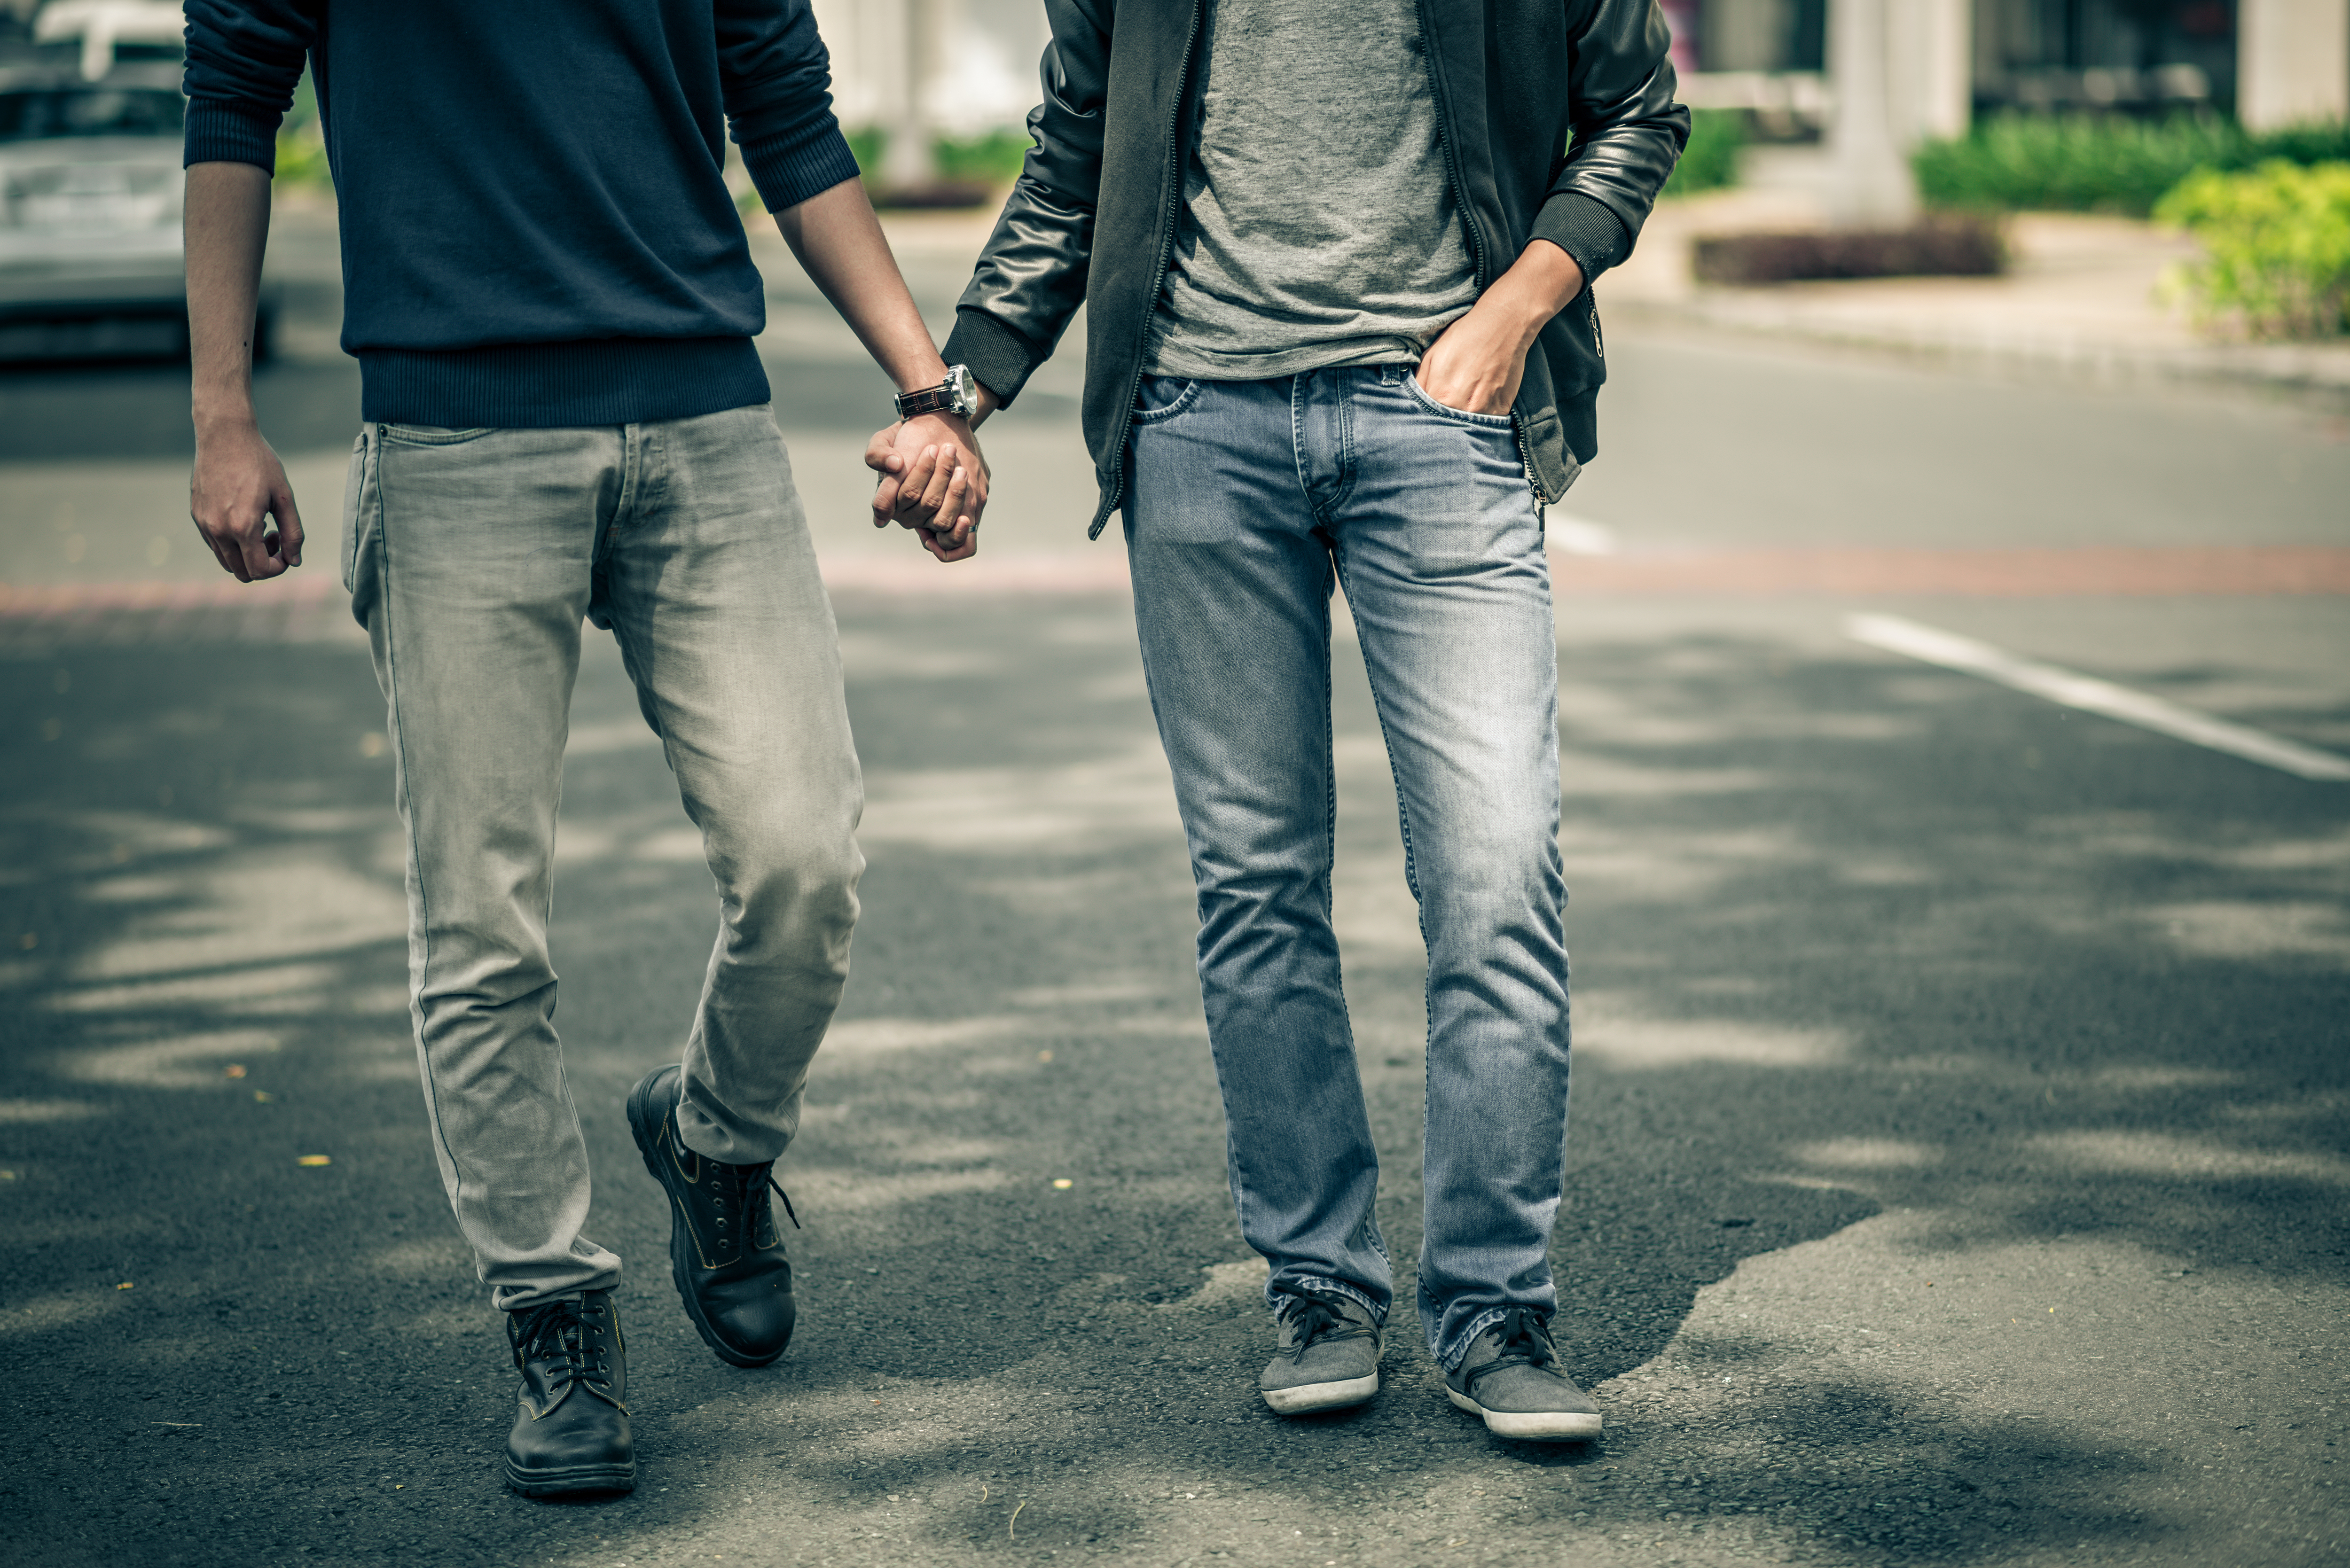 gay couples make open relationships work more often than straight couples